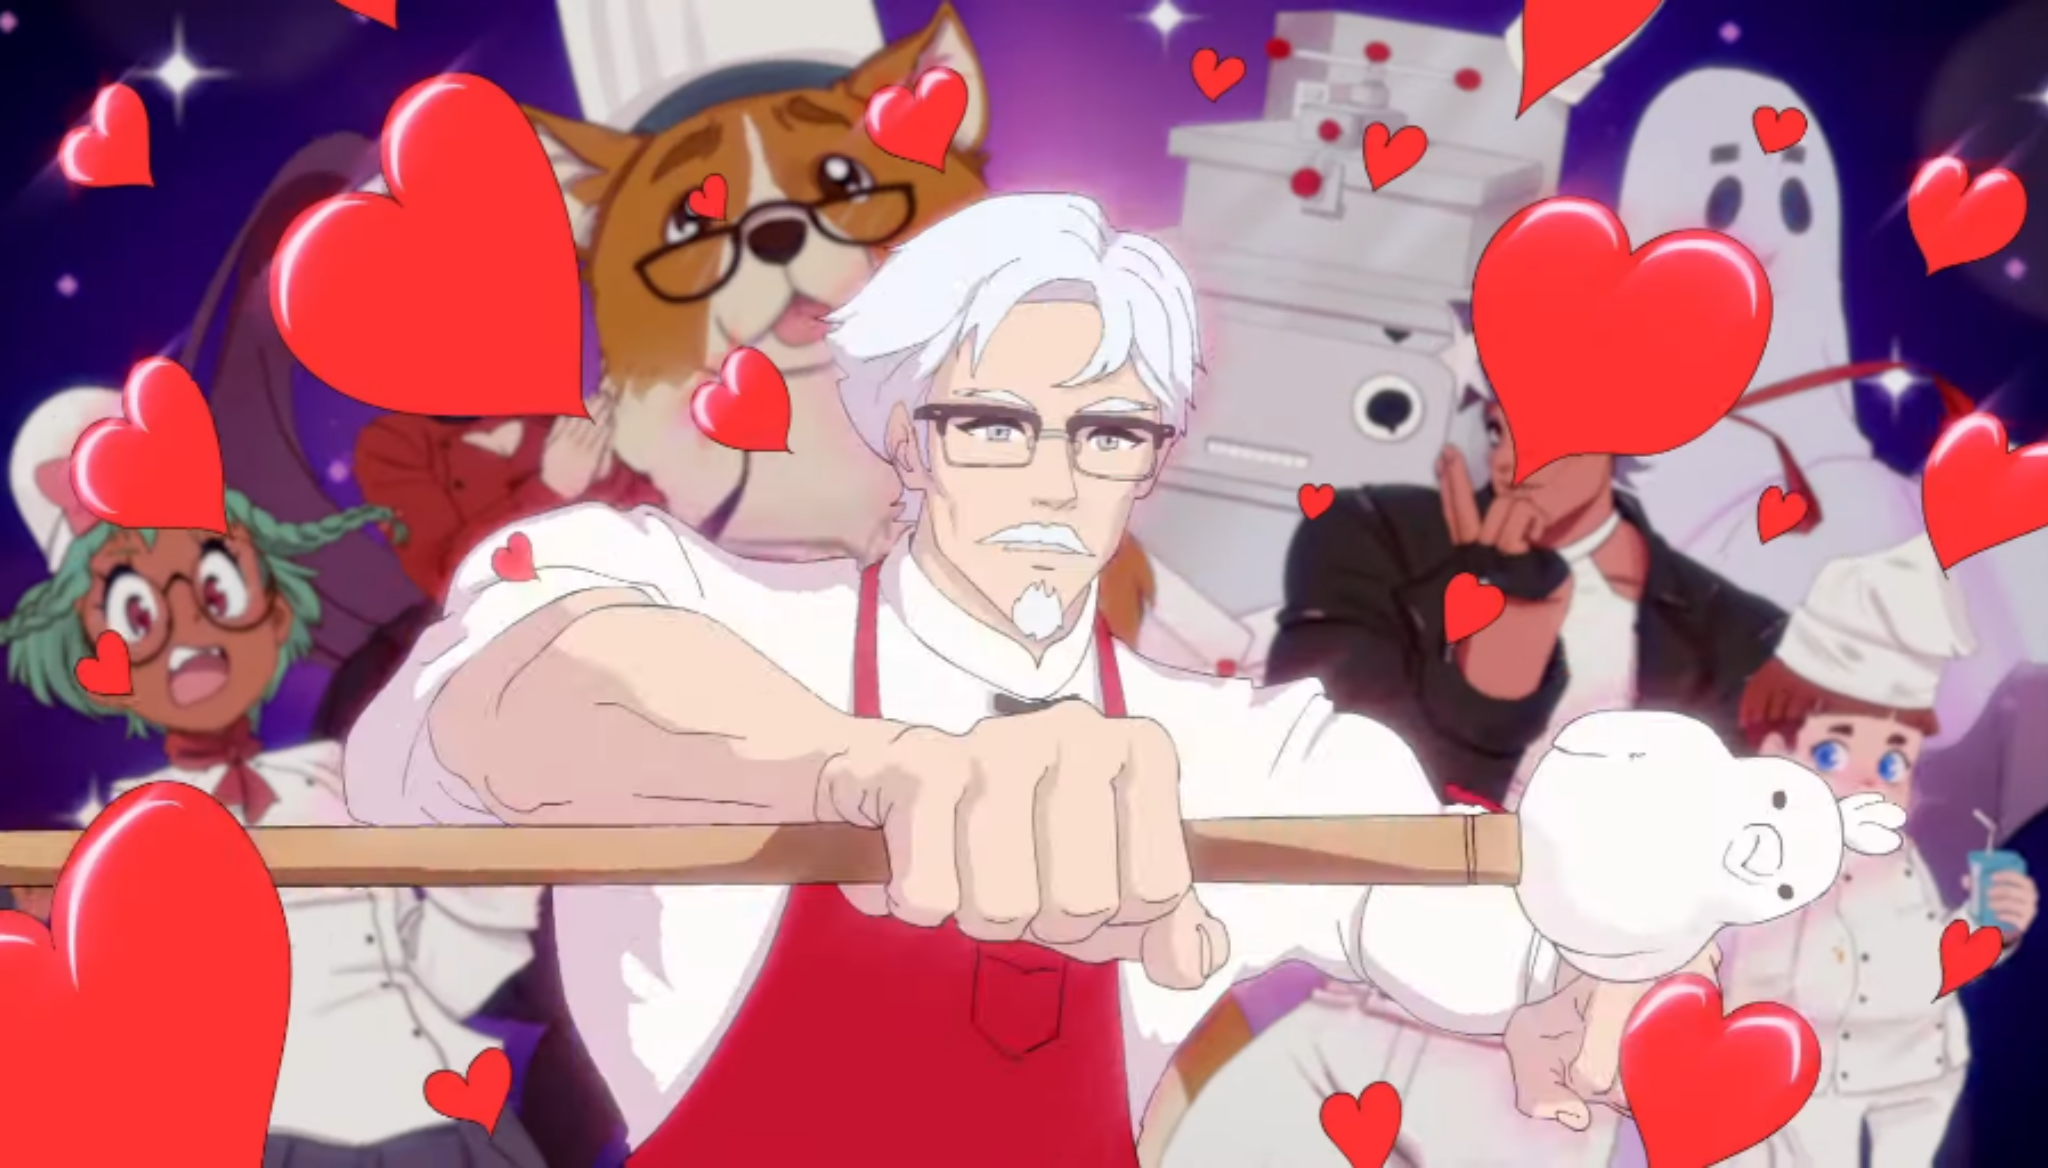 I Love You Colonel Sanders Is Par For The Course For Branded Content   GamePress